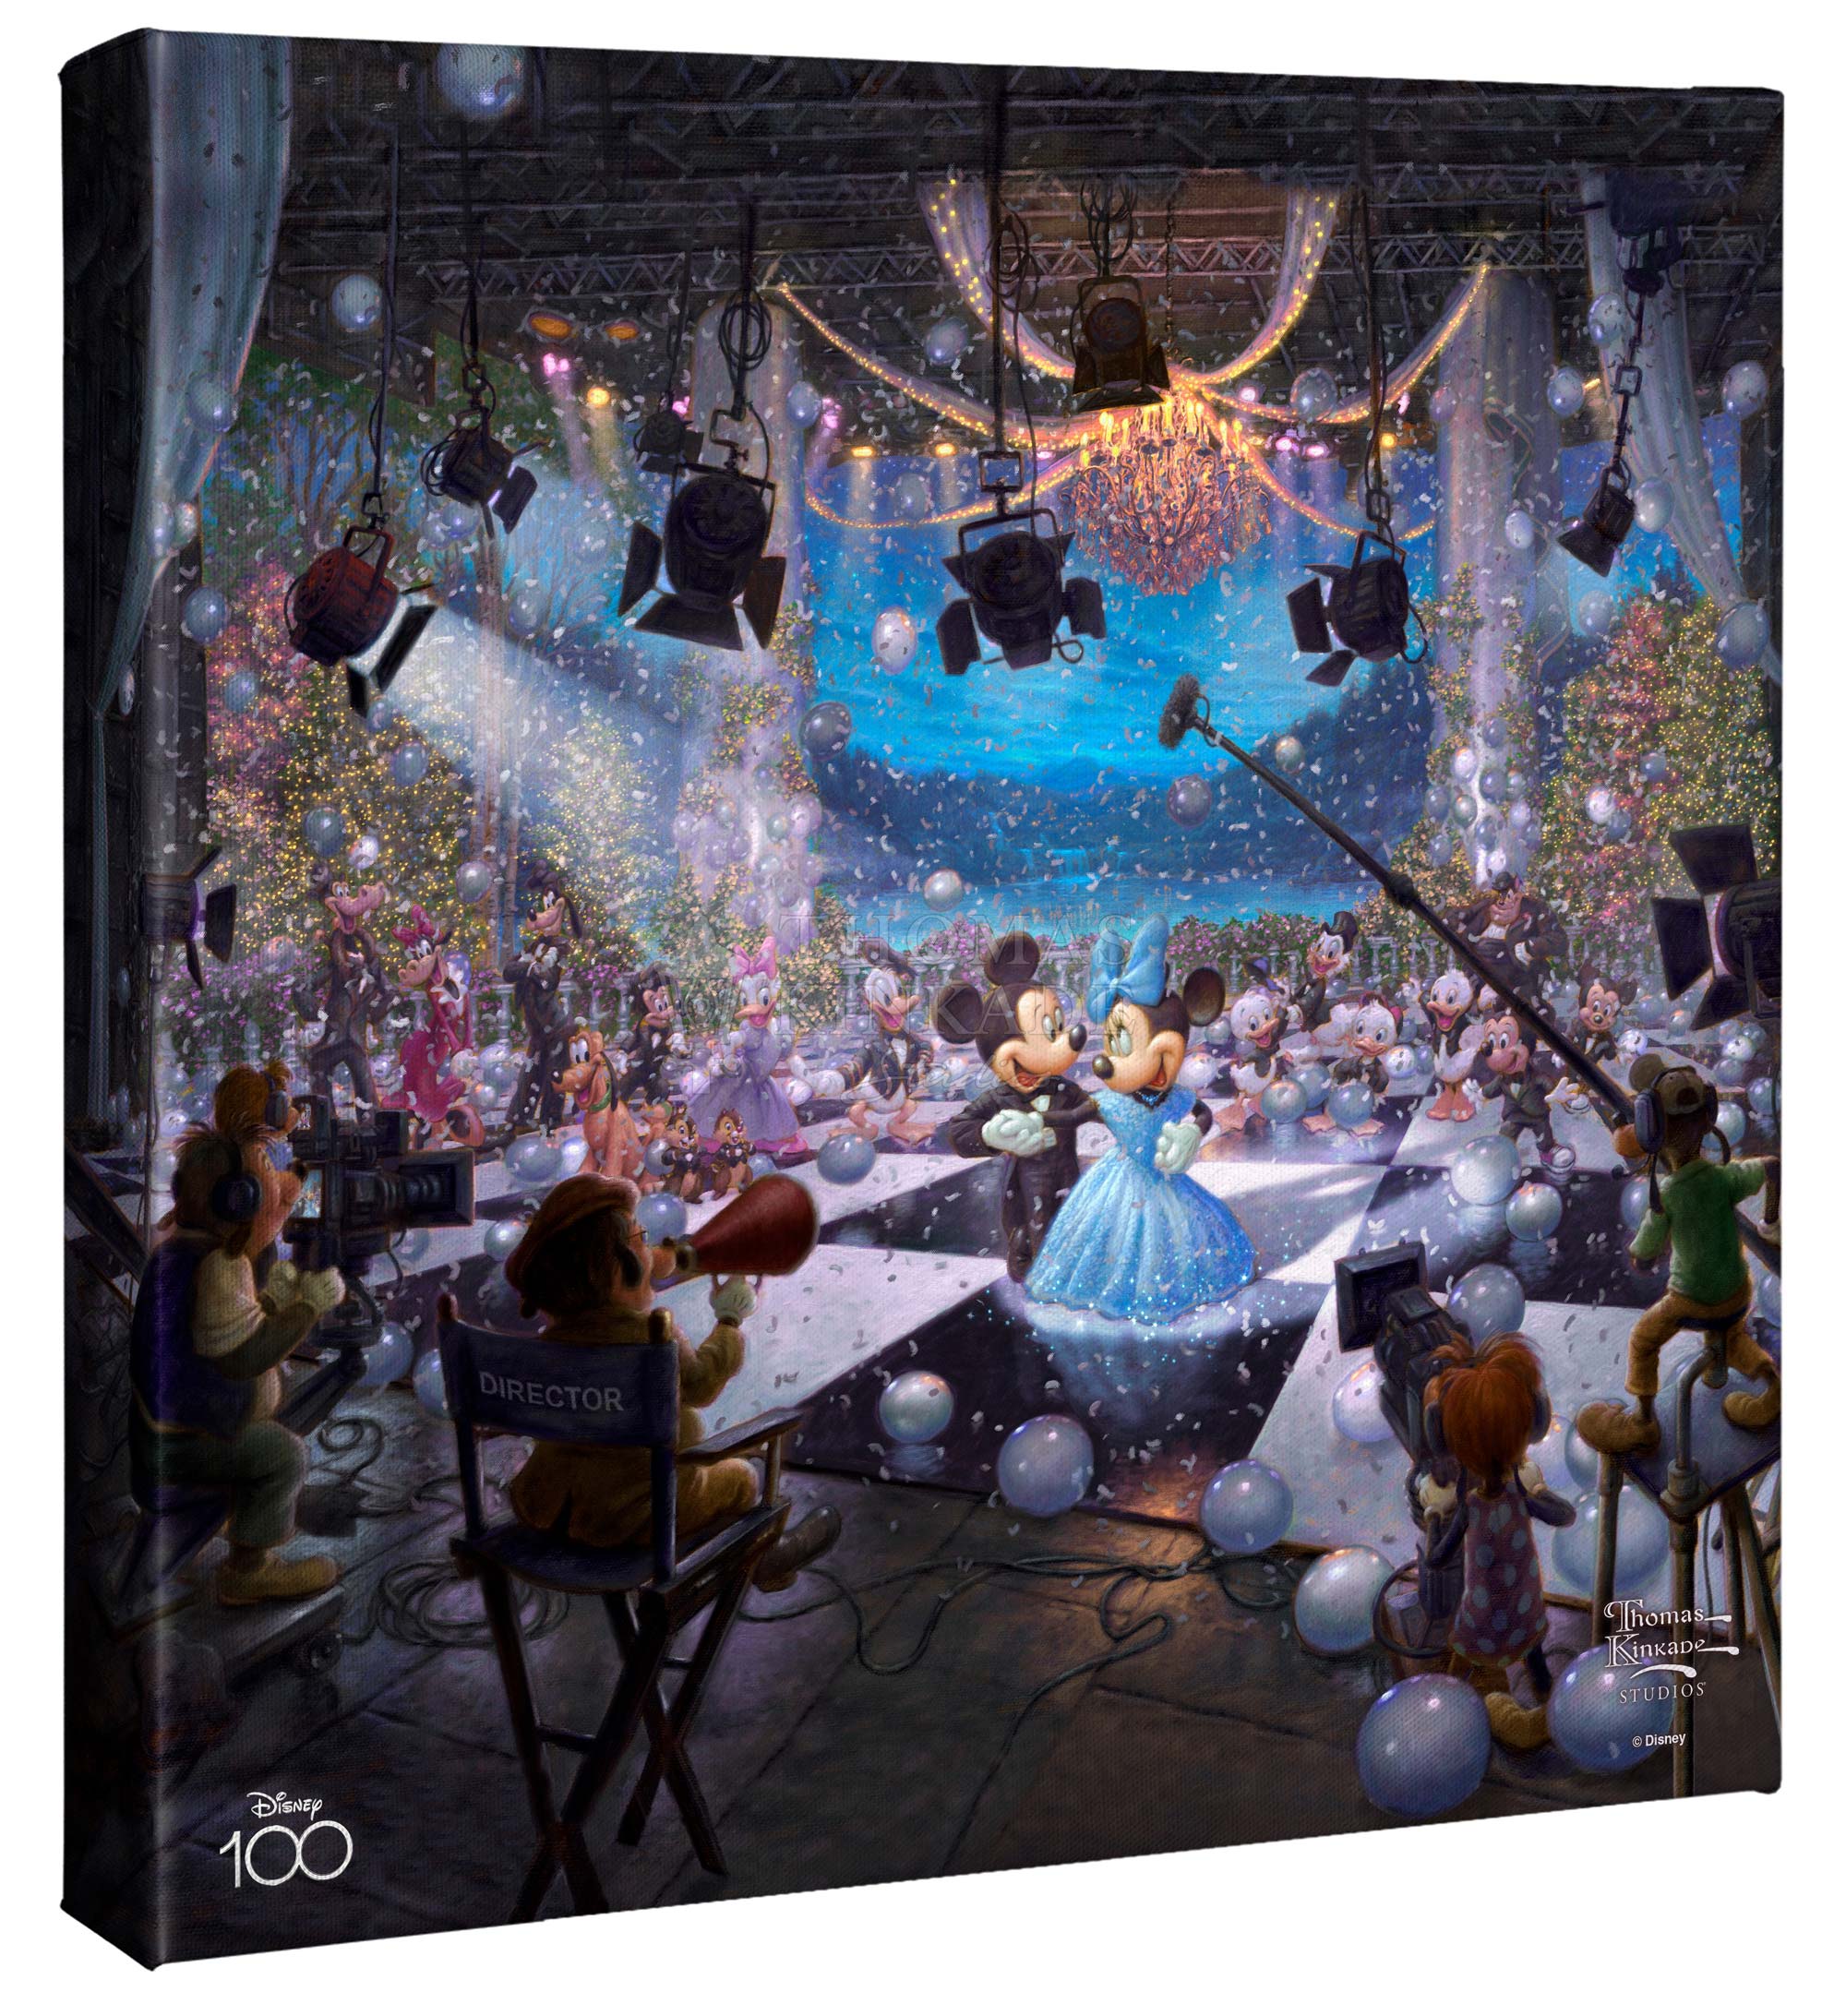 Disney 100th Celebration by Thomas Kinkade Studios  Mickey Mouse and Minnie Mouse have taken up their position on the dance floor, waiting for their cue from the director to start the dance number.  - 14" x 14" - Gallery Canvas Wraps